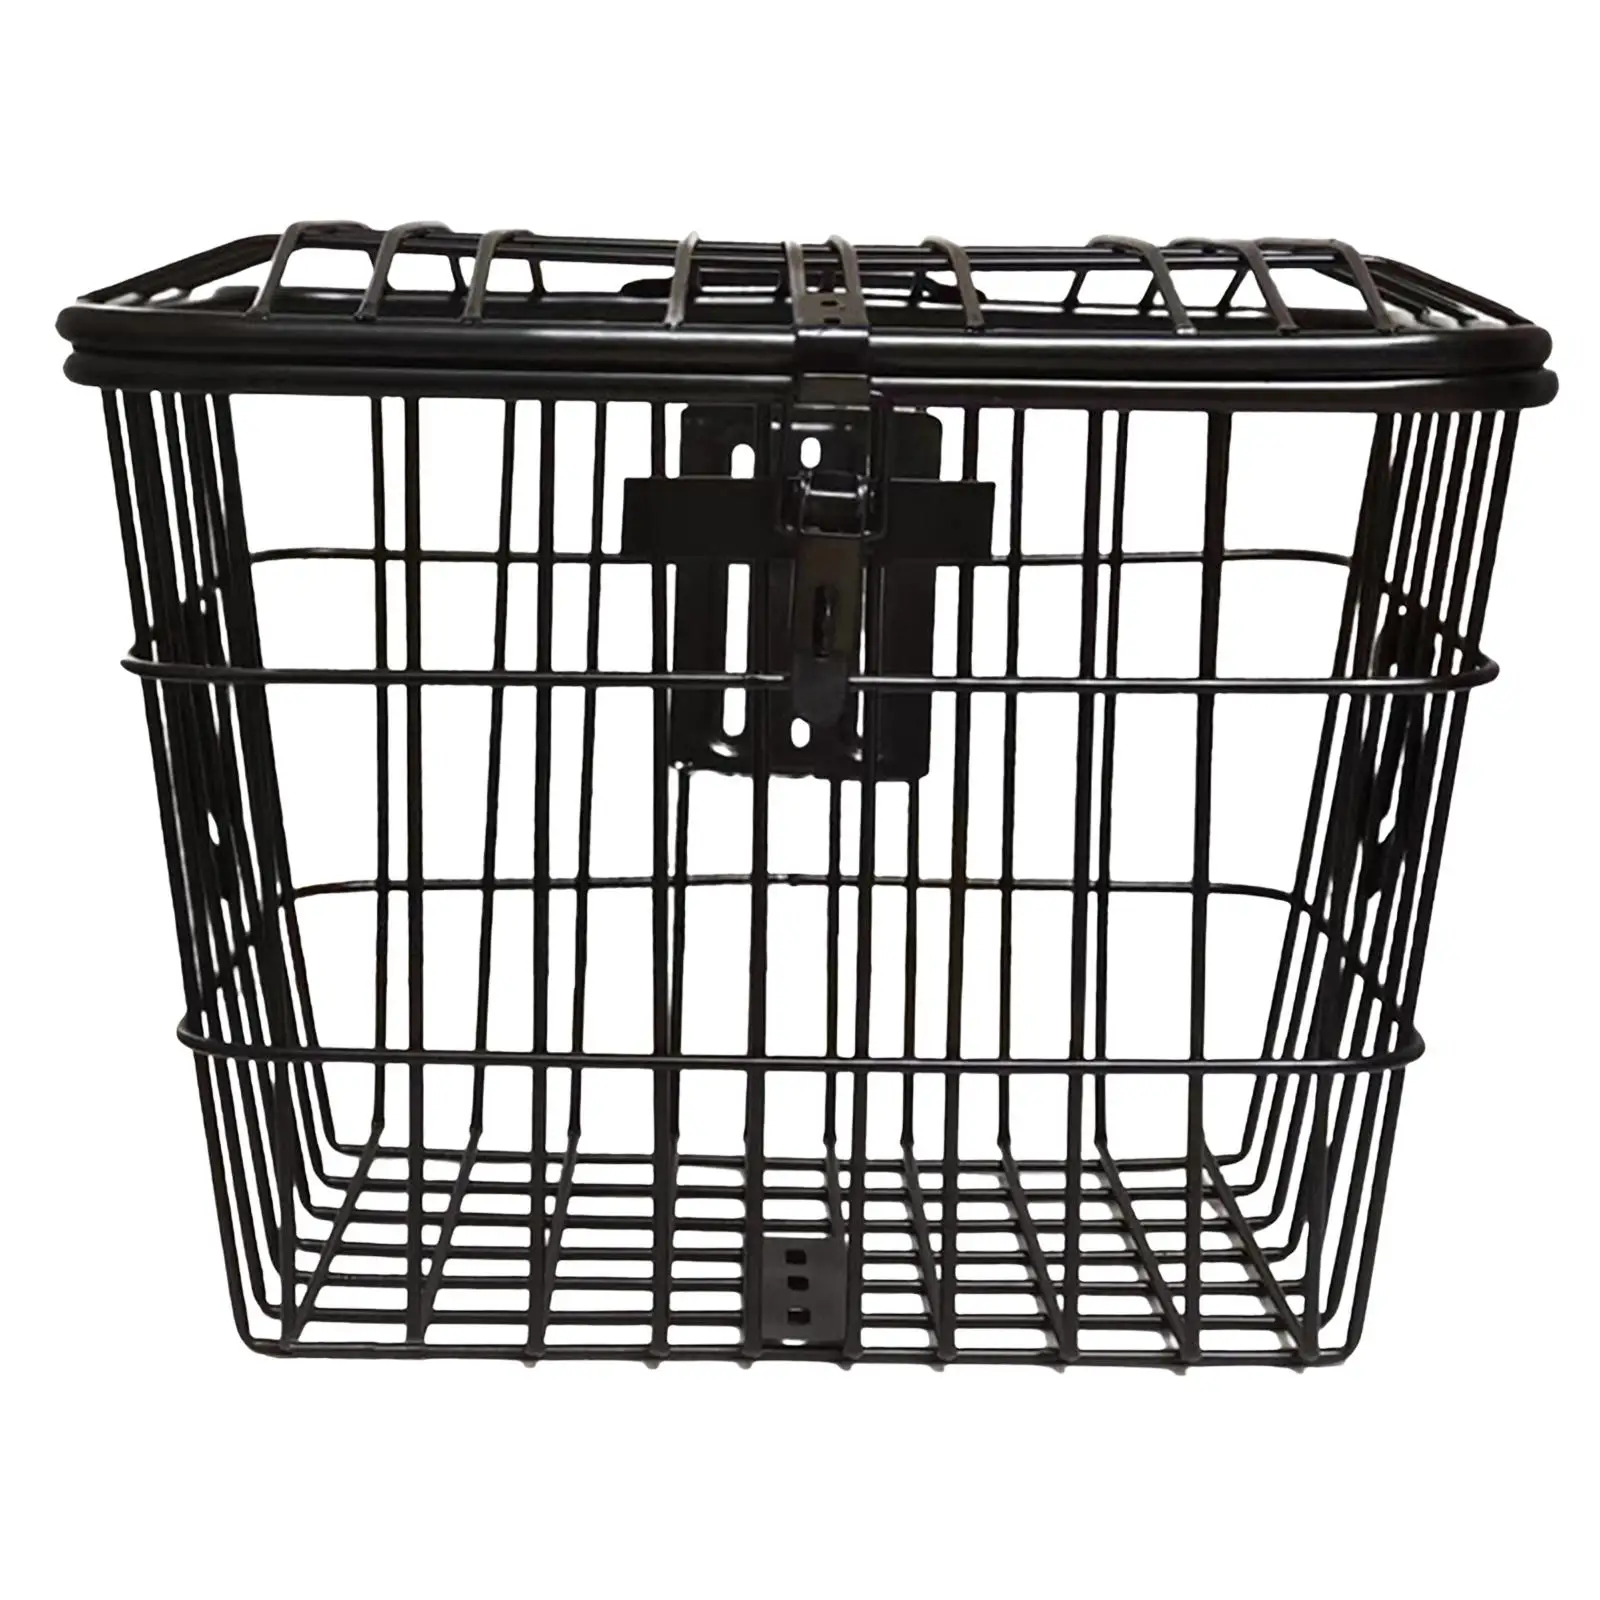 Metal Bike Basket Organizer Large cargo Rack with Lid Cycling Carrier Heavy Duty Front Rear for Folding Bikes Scooters